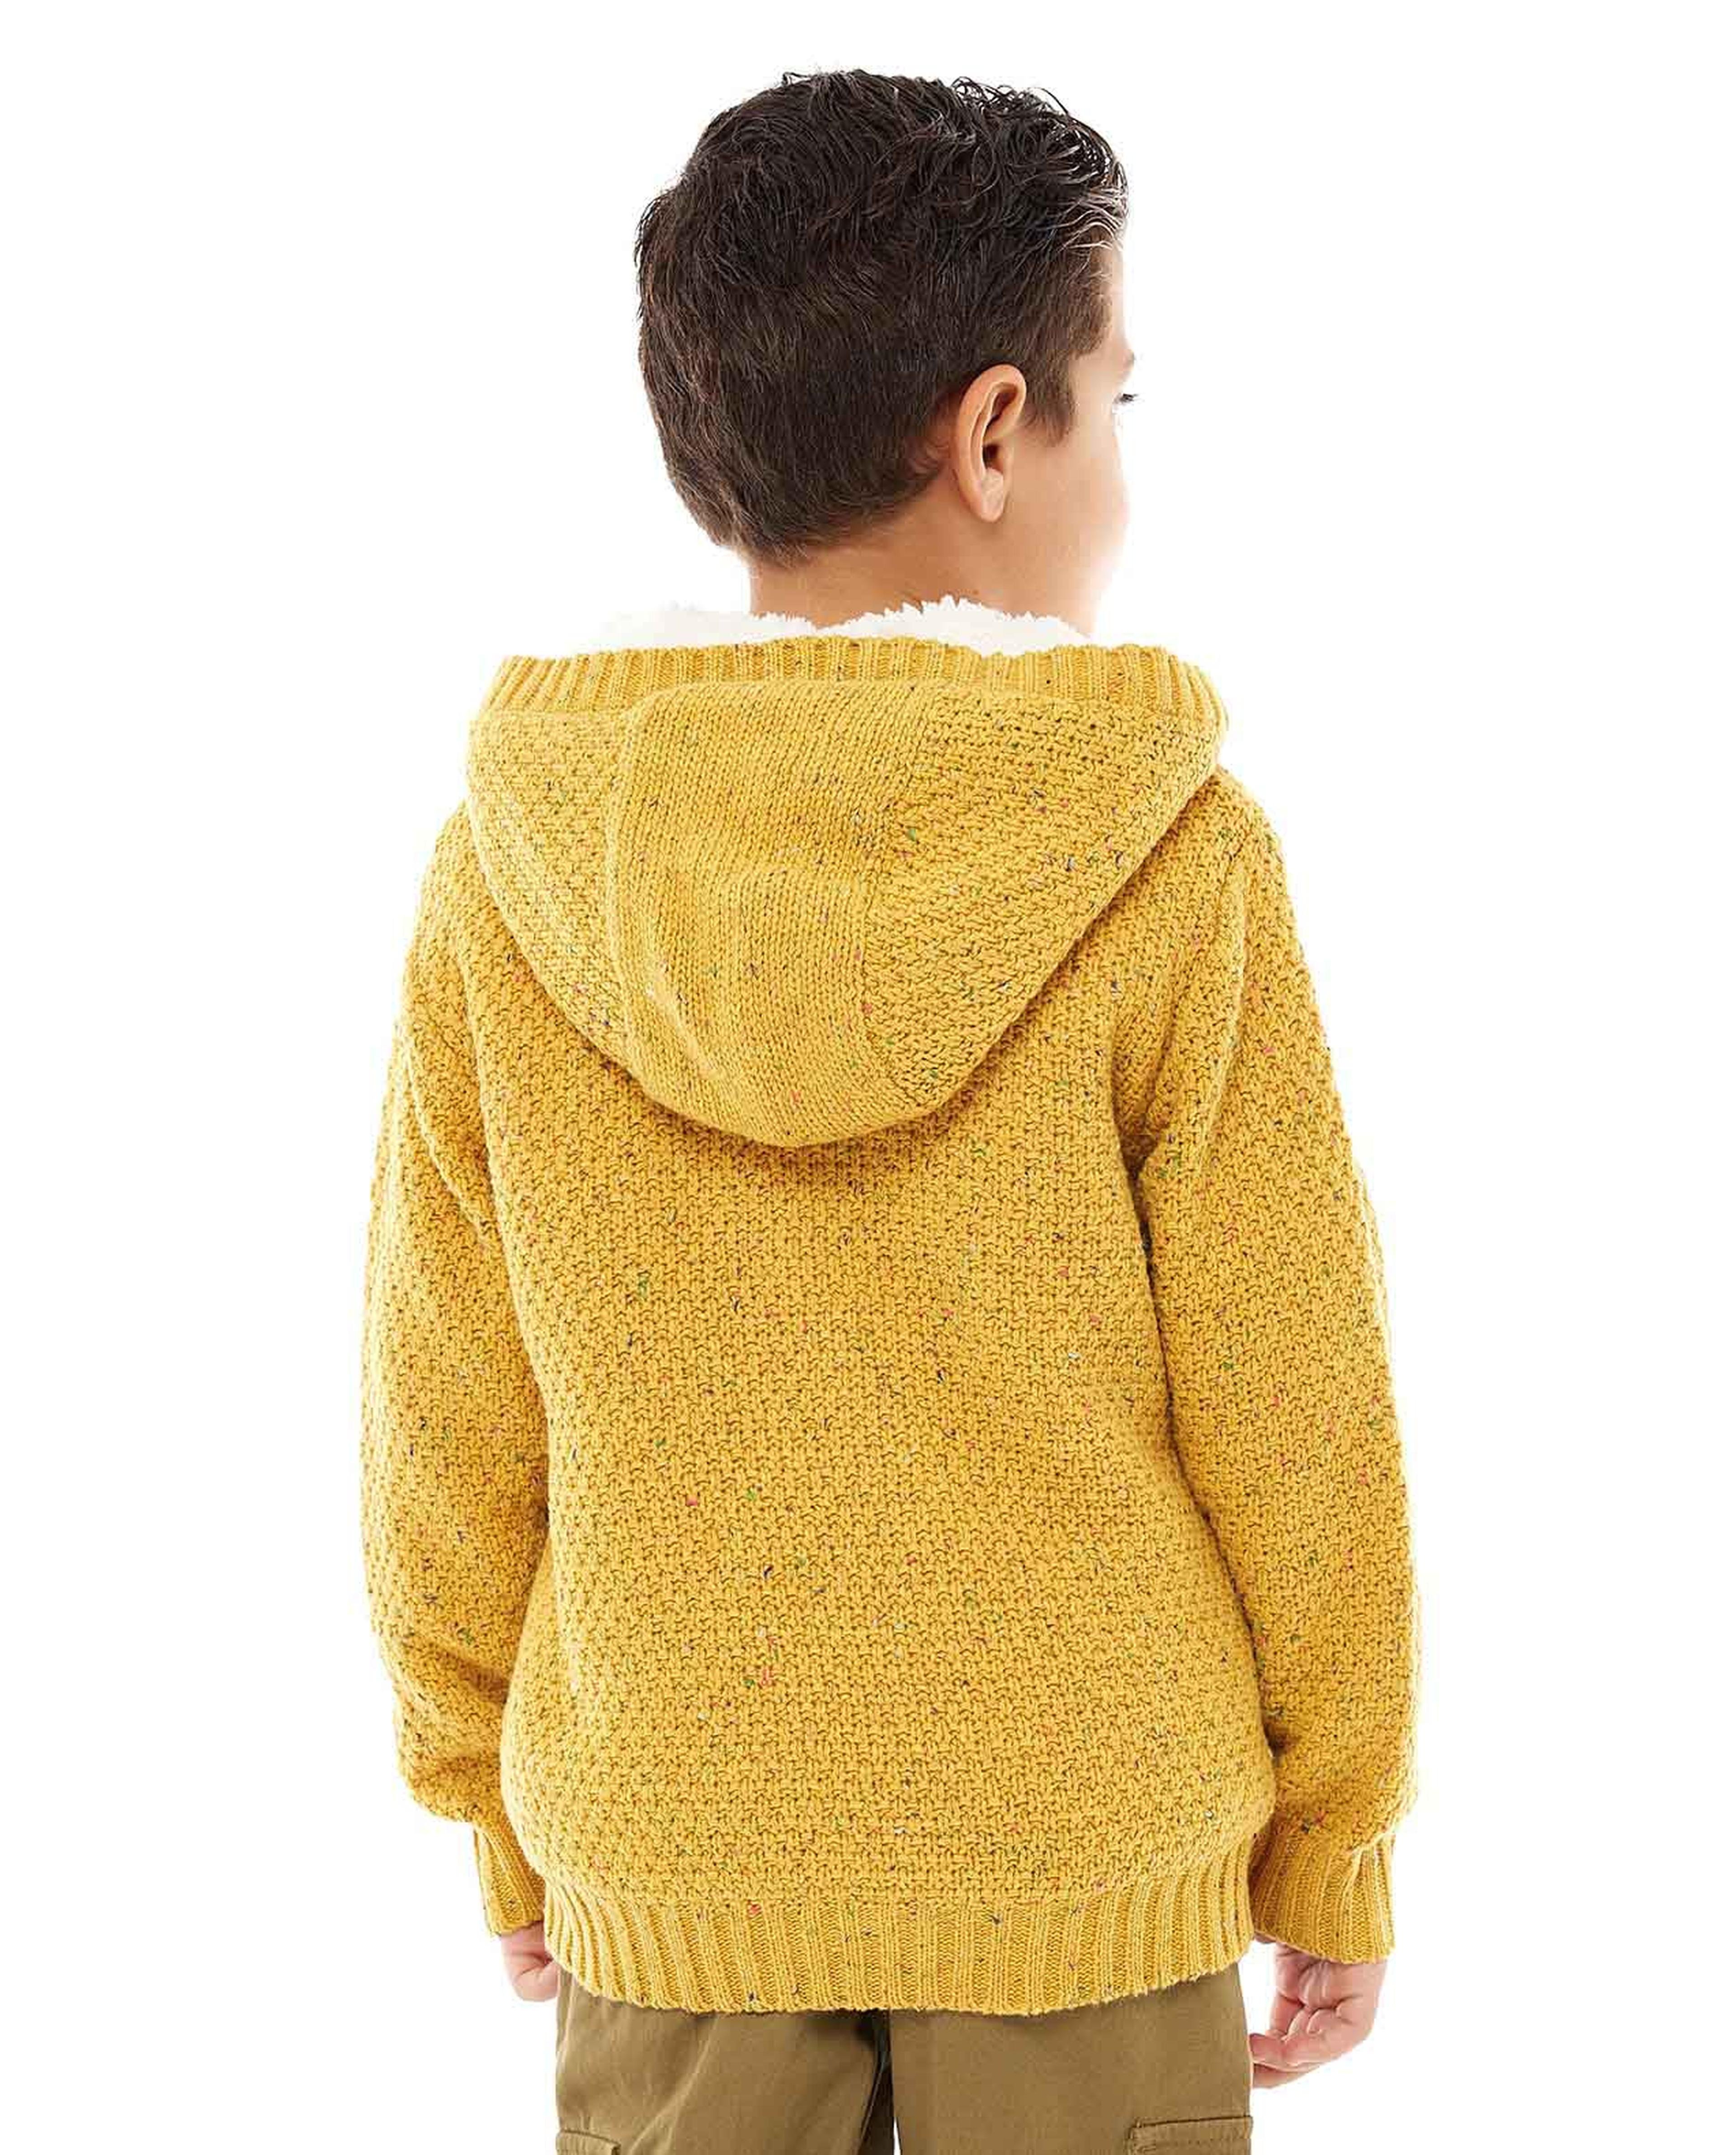 Knitted Hooded Cardigan with Zipper Closure